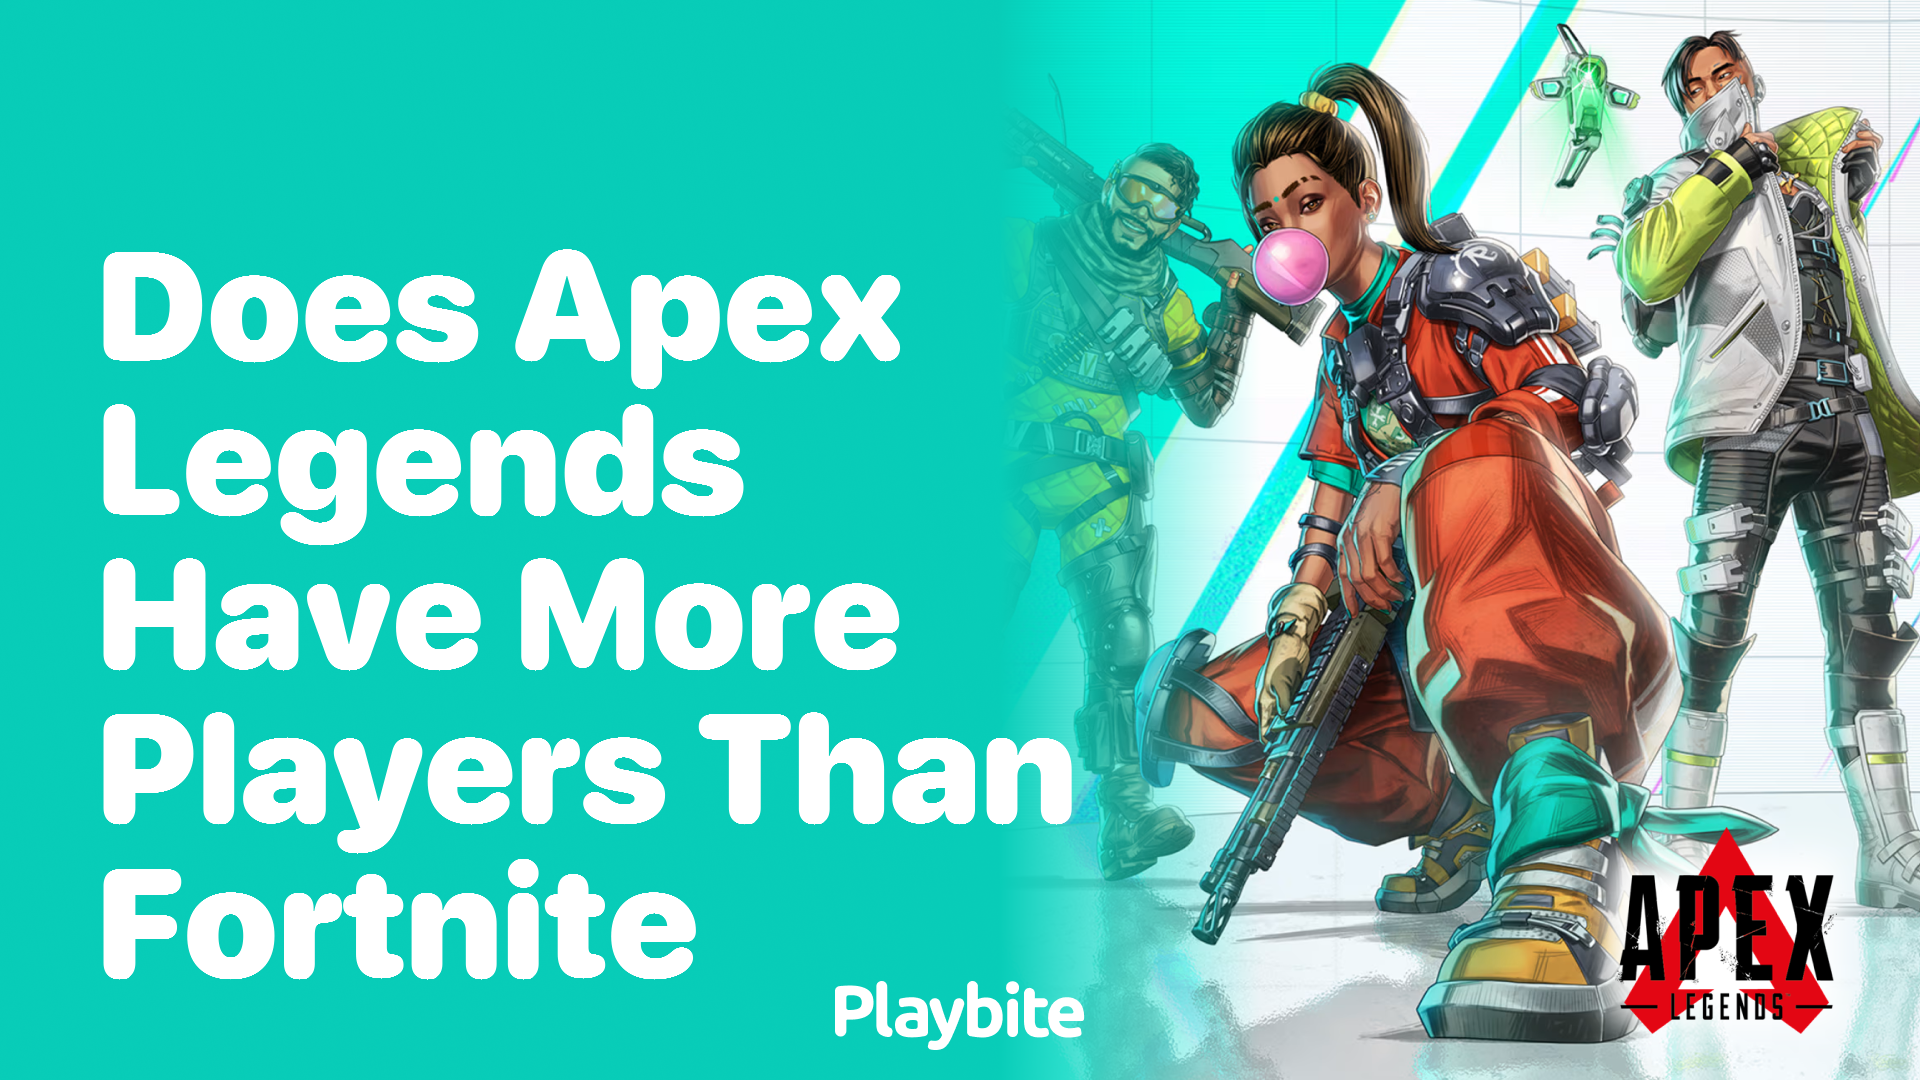 Does Apex Legends have more players than Fortnite?